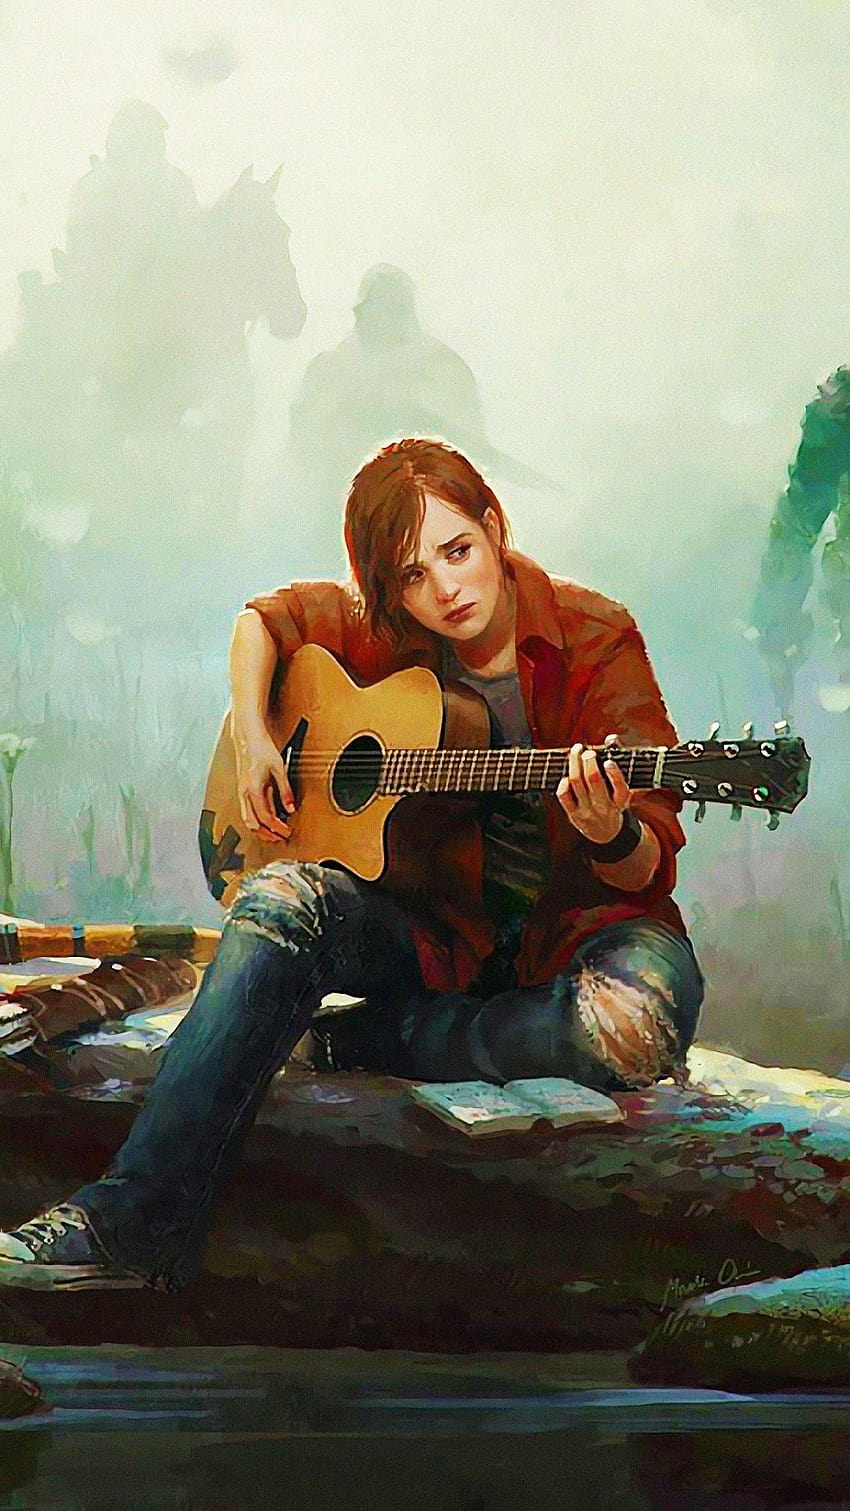 The Last of Us Part 2 Ellie Playing Guitar, the last of us 2 iphone xr HD phone wallpaper